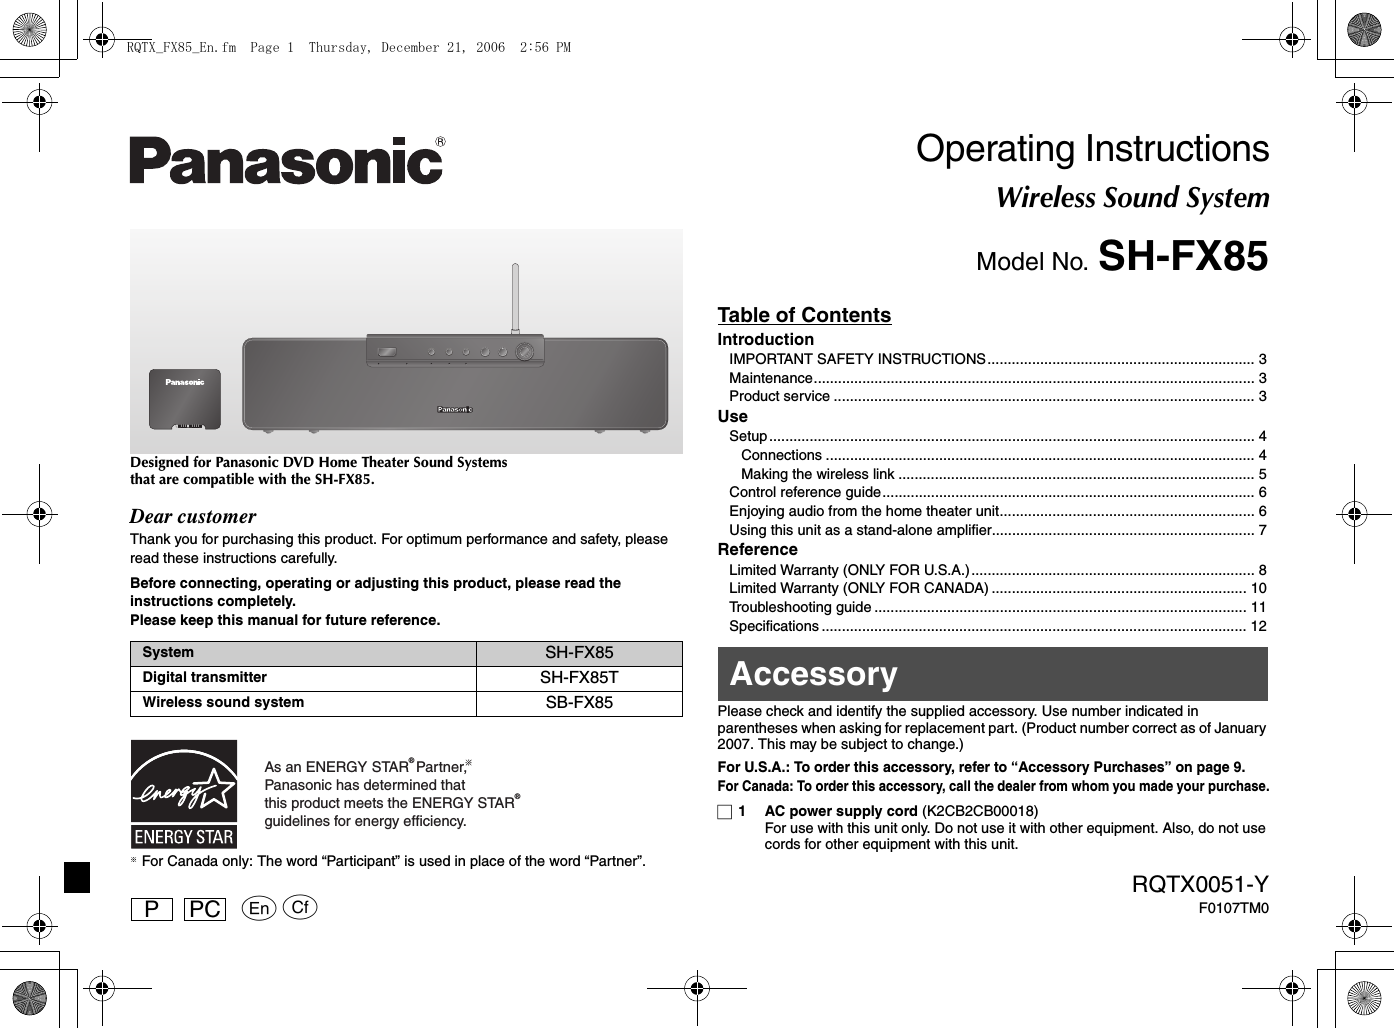 pqRQTX0051-YF0107TM0PPC Designed for Panasonic DVD Home Theater Sound Systems that are compatible with the SH-FX85.Dear customerThank you for purchasing this product. For optimum performance and safety, please read these instructions carefully.Before connecting, operating or adjusting this product, please read the instructions completely. Please keep this manual for future reference.§ For Canada only: The word “Participant” is used in place of the word “Partner”.Operating InstructionsWireless Sound SystemModel No. SH-FX85Table of ContentsIntroductionIMPORTANT SAFETY INSTRUCTIONS.................................................................. 3Maintenance............................................................................................................. 3Product service ........................................................................................................ 3UseSetup ........................................................................................................................ 4Connections .......................................................................................................... 4Making the wireless link ........................................................................................ 5Control reference guide............................................................................................ 6Enjoying audio from the home theater unit............................................................... 6Using this unit as a stand-alone amplifier................................................................. 7ReferenceLimited Warranty (ONLY FOR U.S.A.)...................................................................... 8Limited Warranty (ONLY FOR CANADA) ............................................................... 10Troubleshooting guide ............................................................................................ 11Specifications ......................................................................................................... 12Please check and identify the supplied accessory. Use number indicated in parentheses when asking for replacement part. (Product number correct as of January 2007. This may be subject to change.)For U.S.A.: To order this accessory, refer to “Accessory Purchases” on page 9.For Canada: To order this accessory, call the dealer from whom you made your purchase.∏1 AC power supply cord (K2CB2CB00018)For use with this unit only. Do not use it with other equipment. Also, do not use cords for other equipment with this unit.System SH-FX85Digital transmitter SH-FX85TWireless sound system SB-FX85As an ENERGY STAR  Partner, Panasonic has determined thatthis product meets the ENERGY STAR  guidelines for energy efficiency.®®AccessoryRQTX_FX85_En.fm  Page 1  Thursday, December 21, 2006  2:56 PM